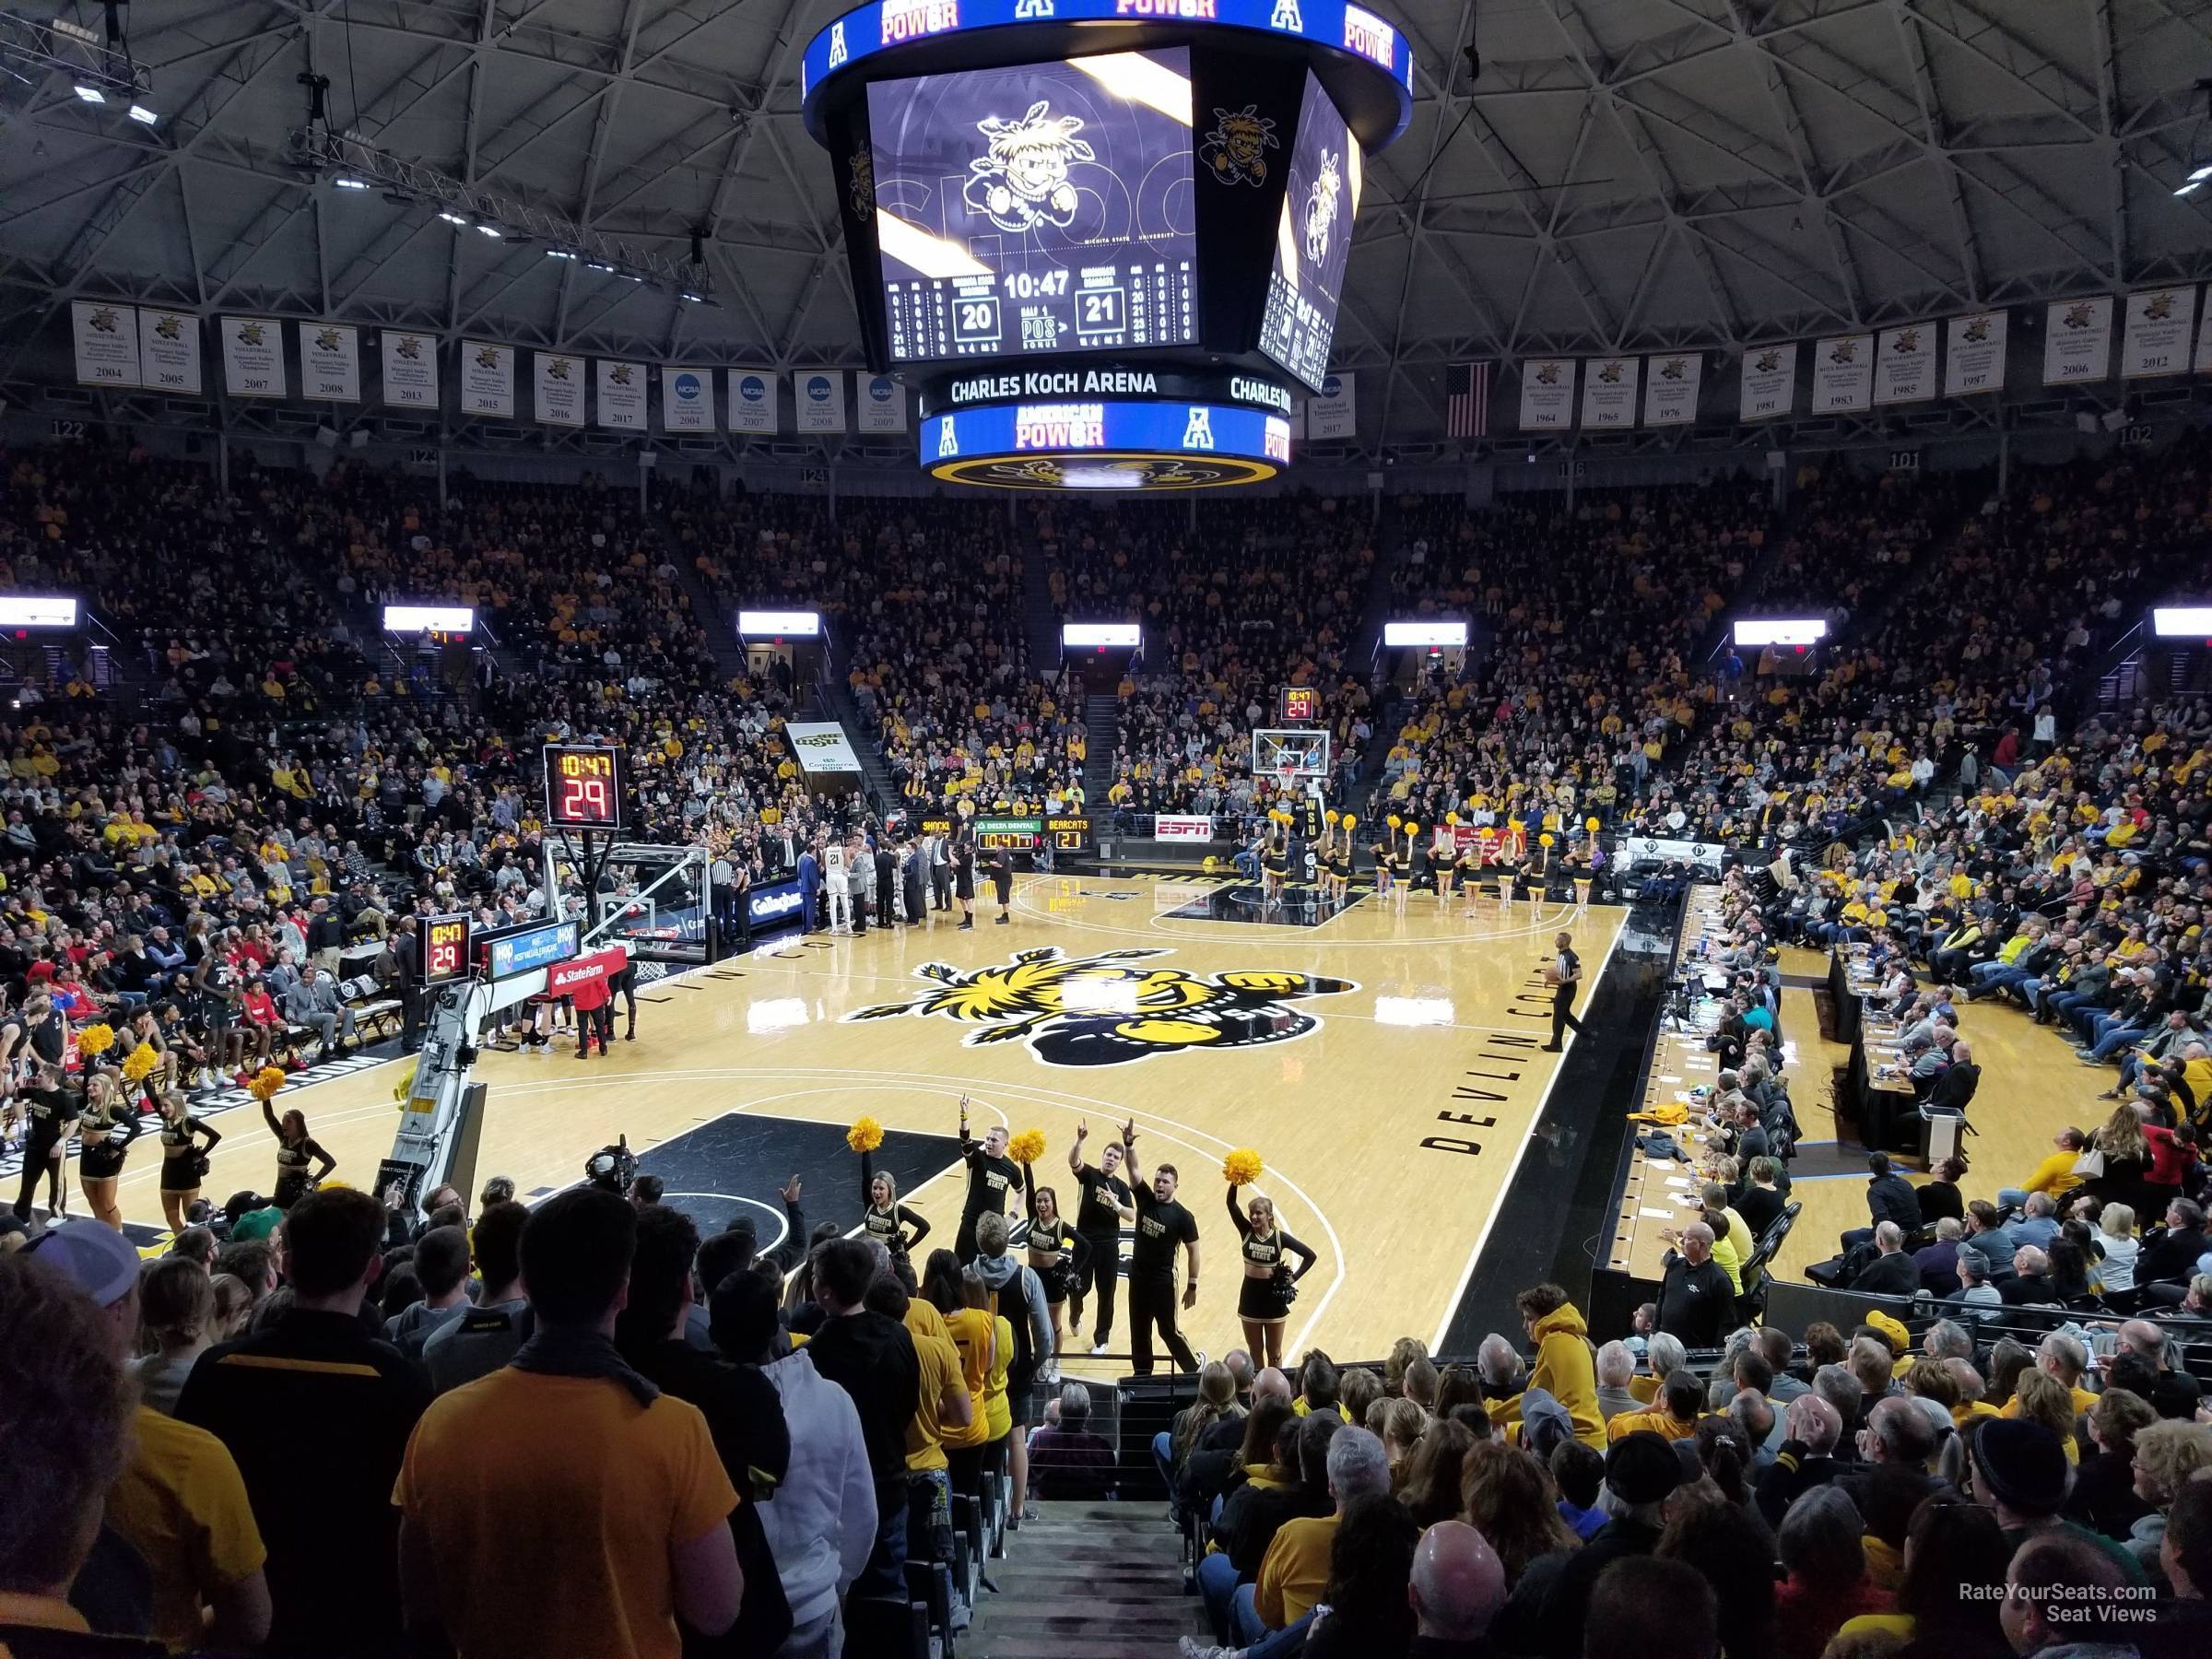 section 114, row 16 seat view  - charles koch arena